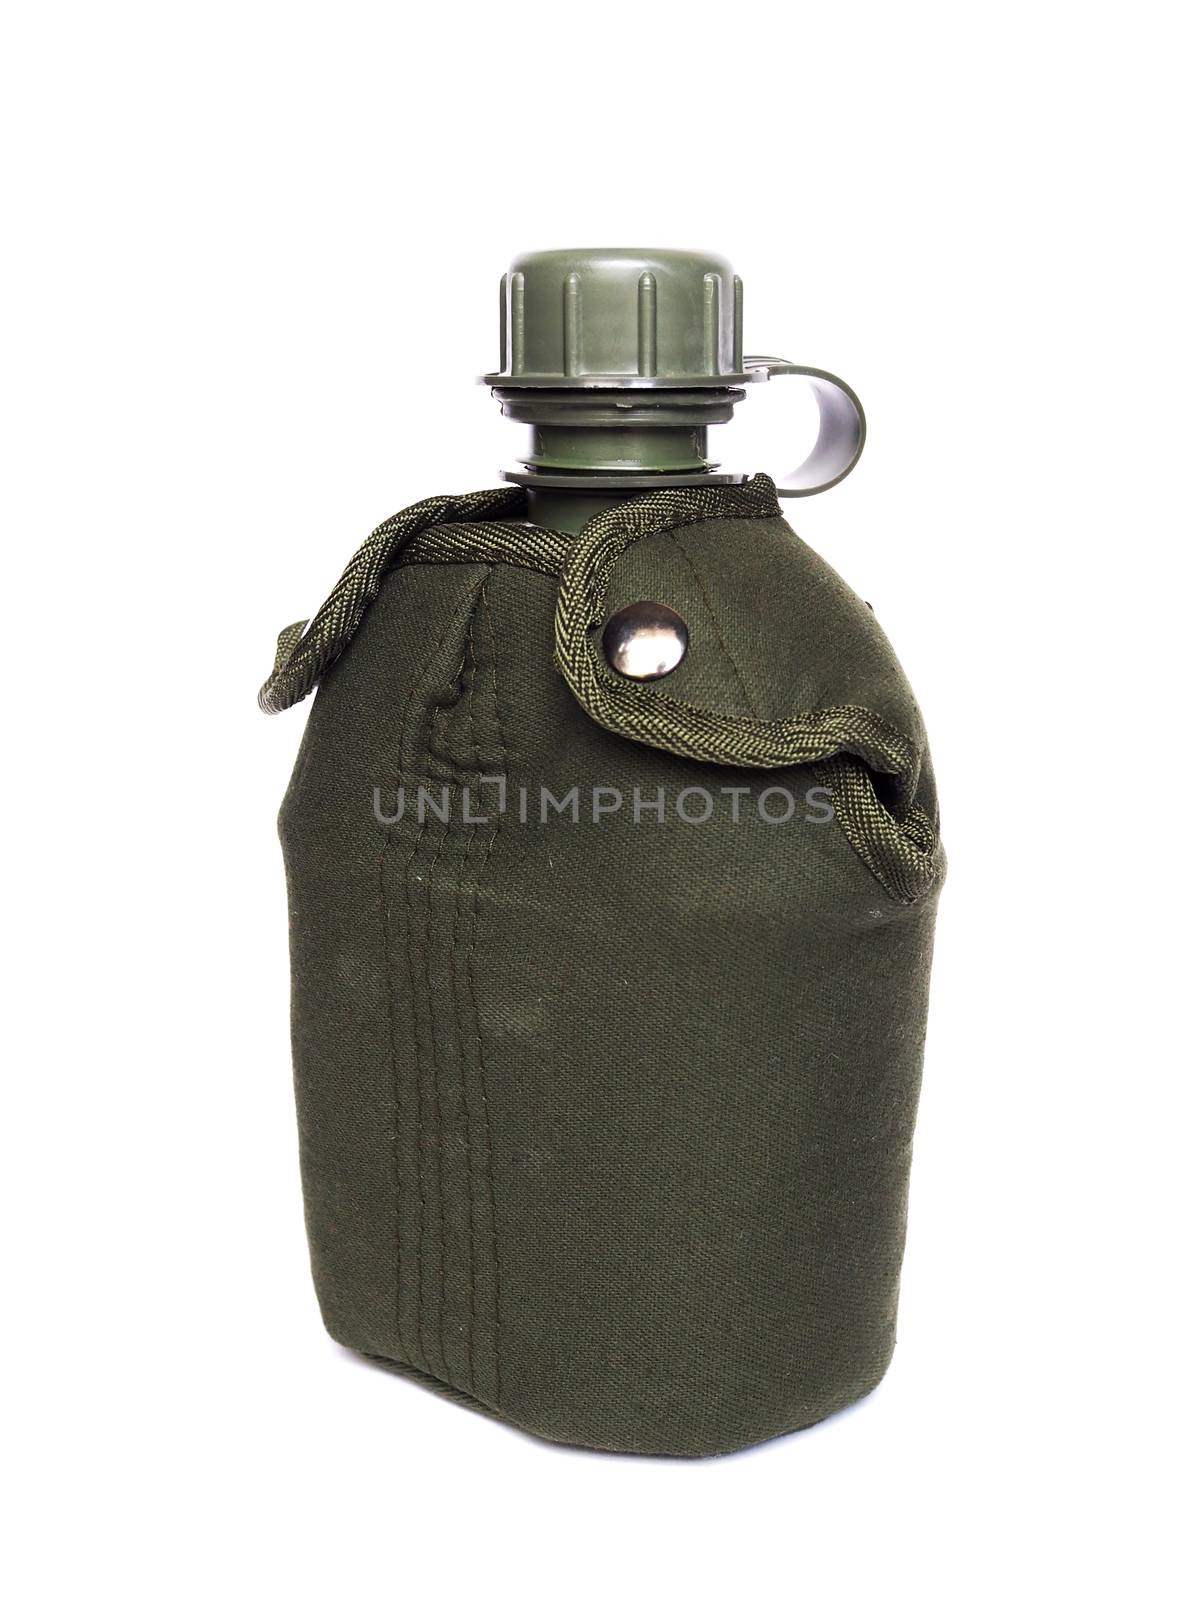 Green military water bottle for hiking, camping. Isolated on white background.